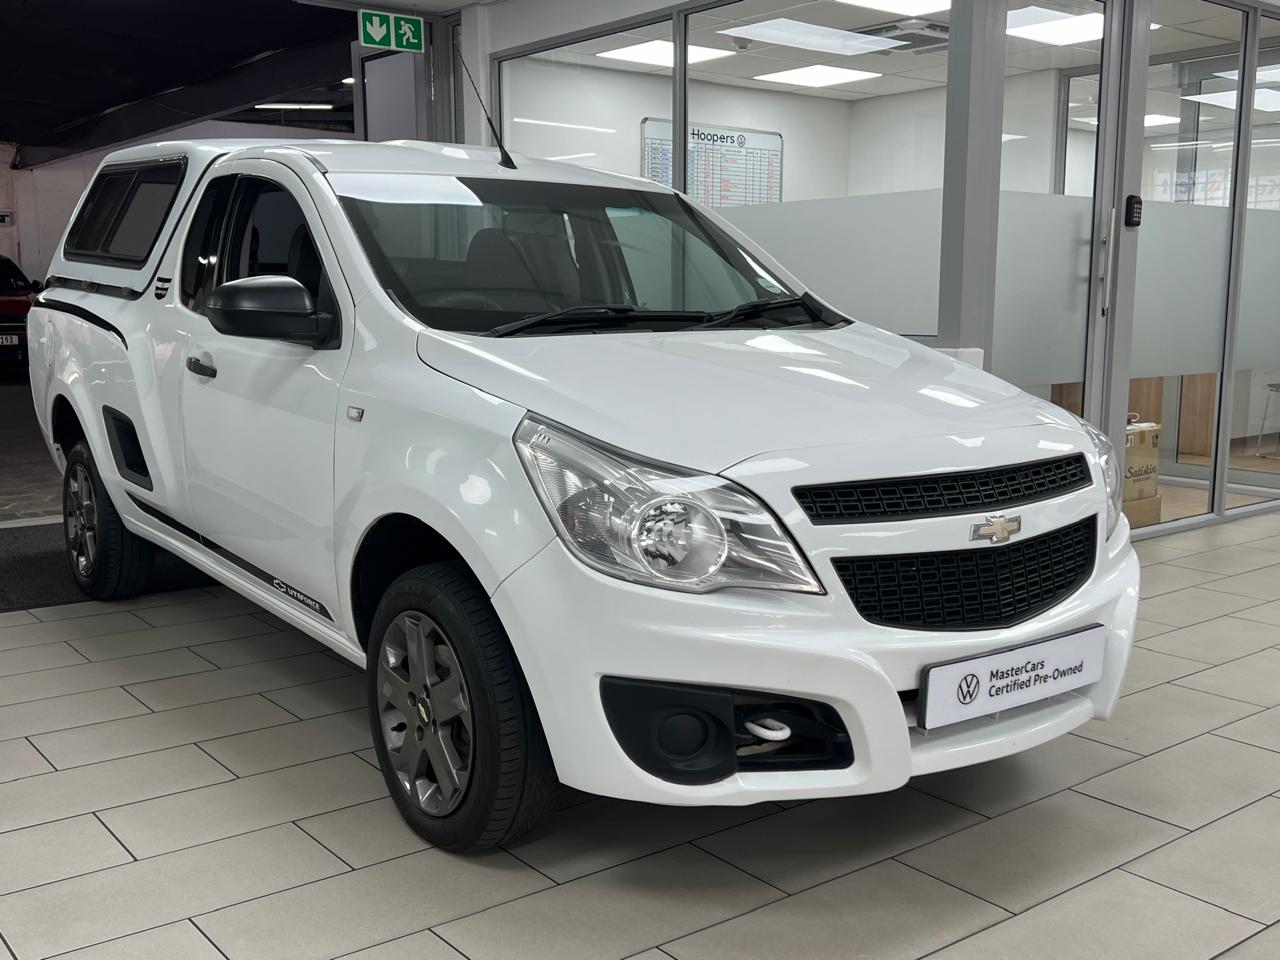 2015 Chevrolet Utility  for sale - 09009